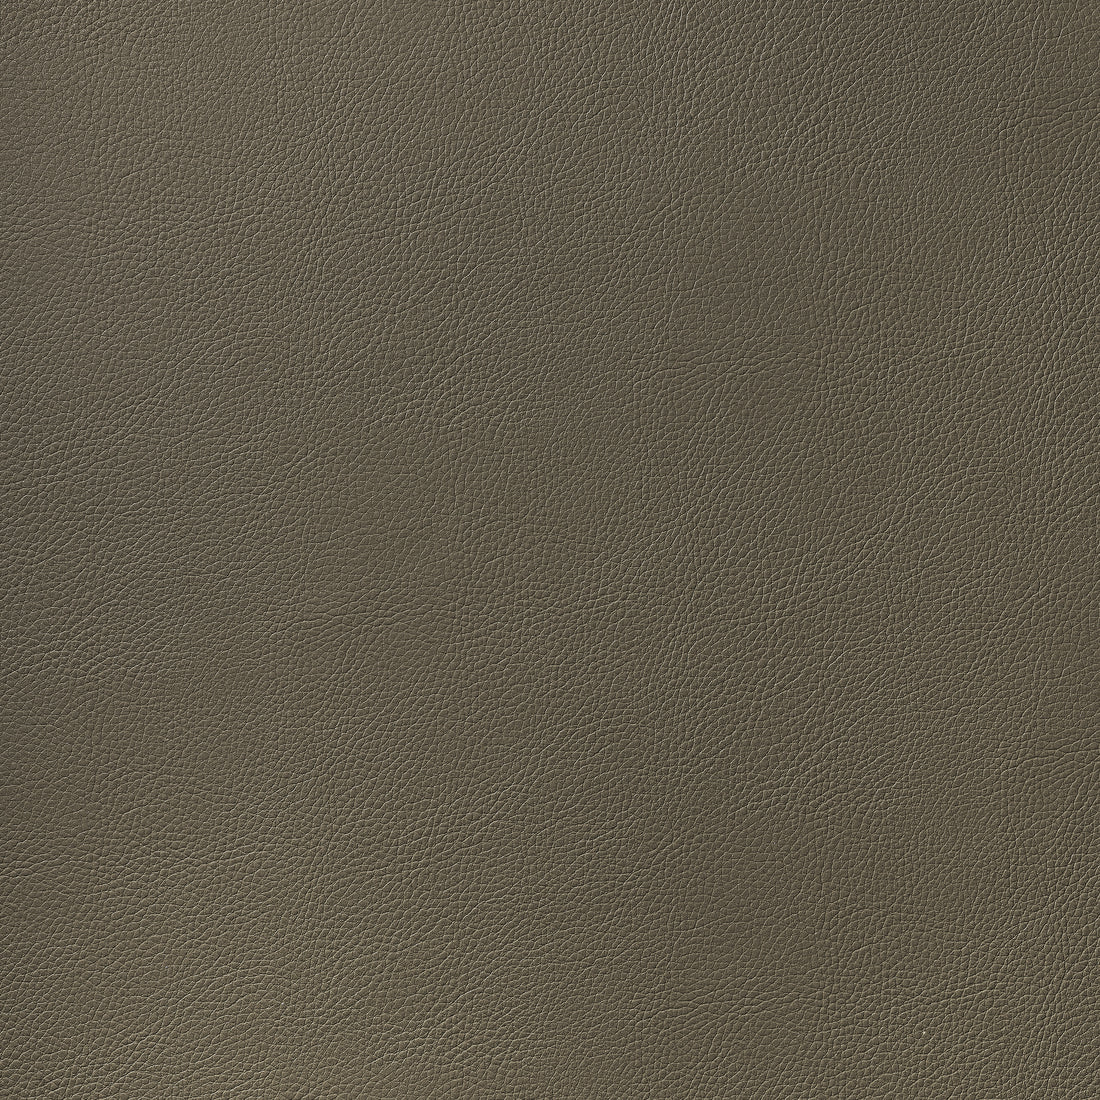 Arcata fabric in hickory color - pattern number W78396 - by Thibaut in the  Sierra collection